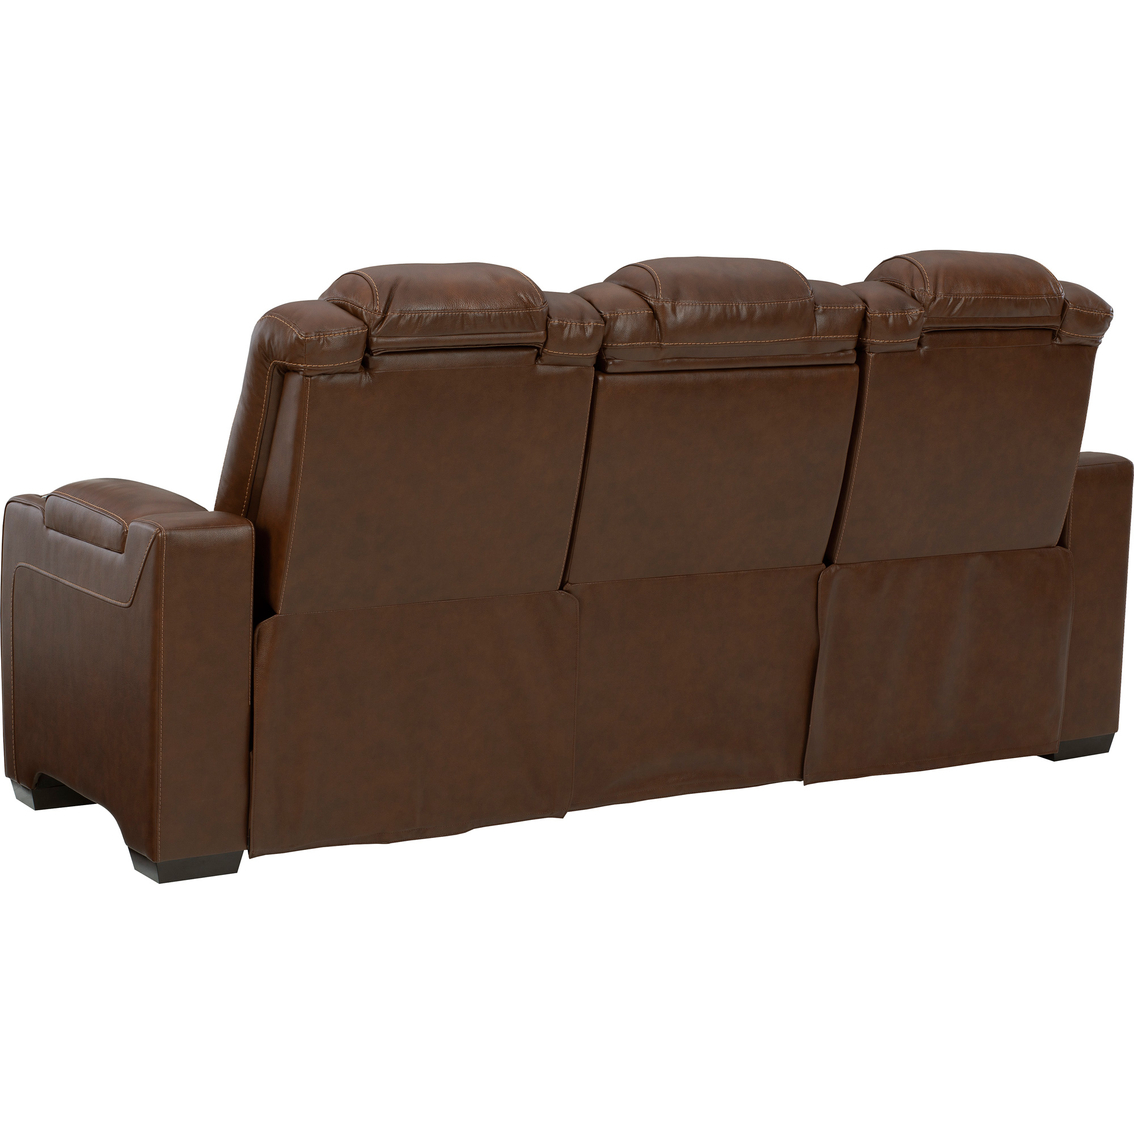 Signature Design by Ashley Backtrack Power Reclining Sofa with Adjustable Headrest - Image 3 of 10